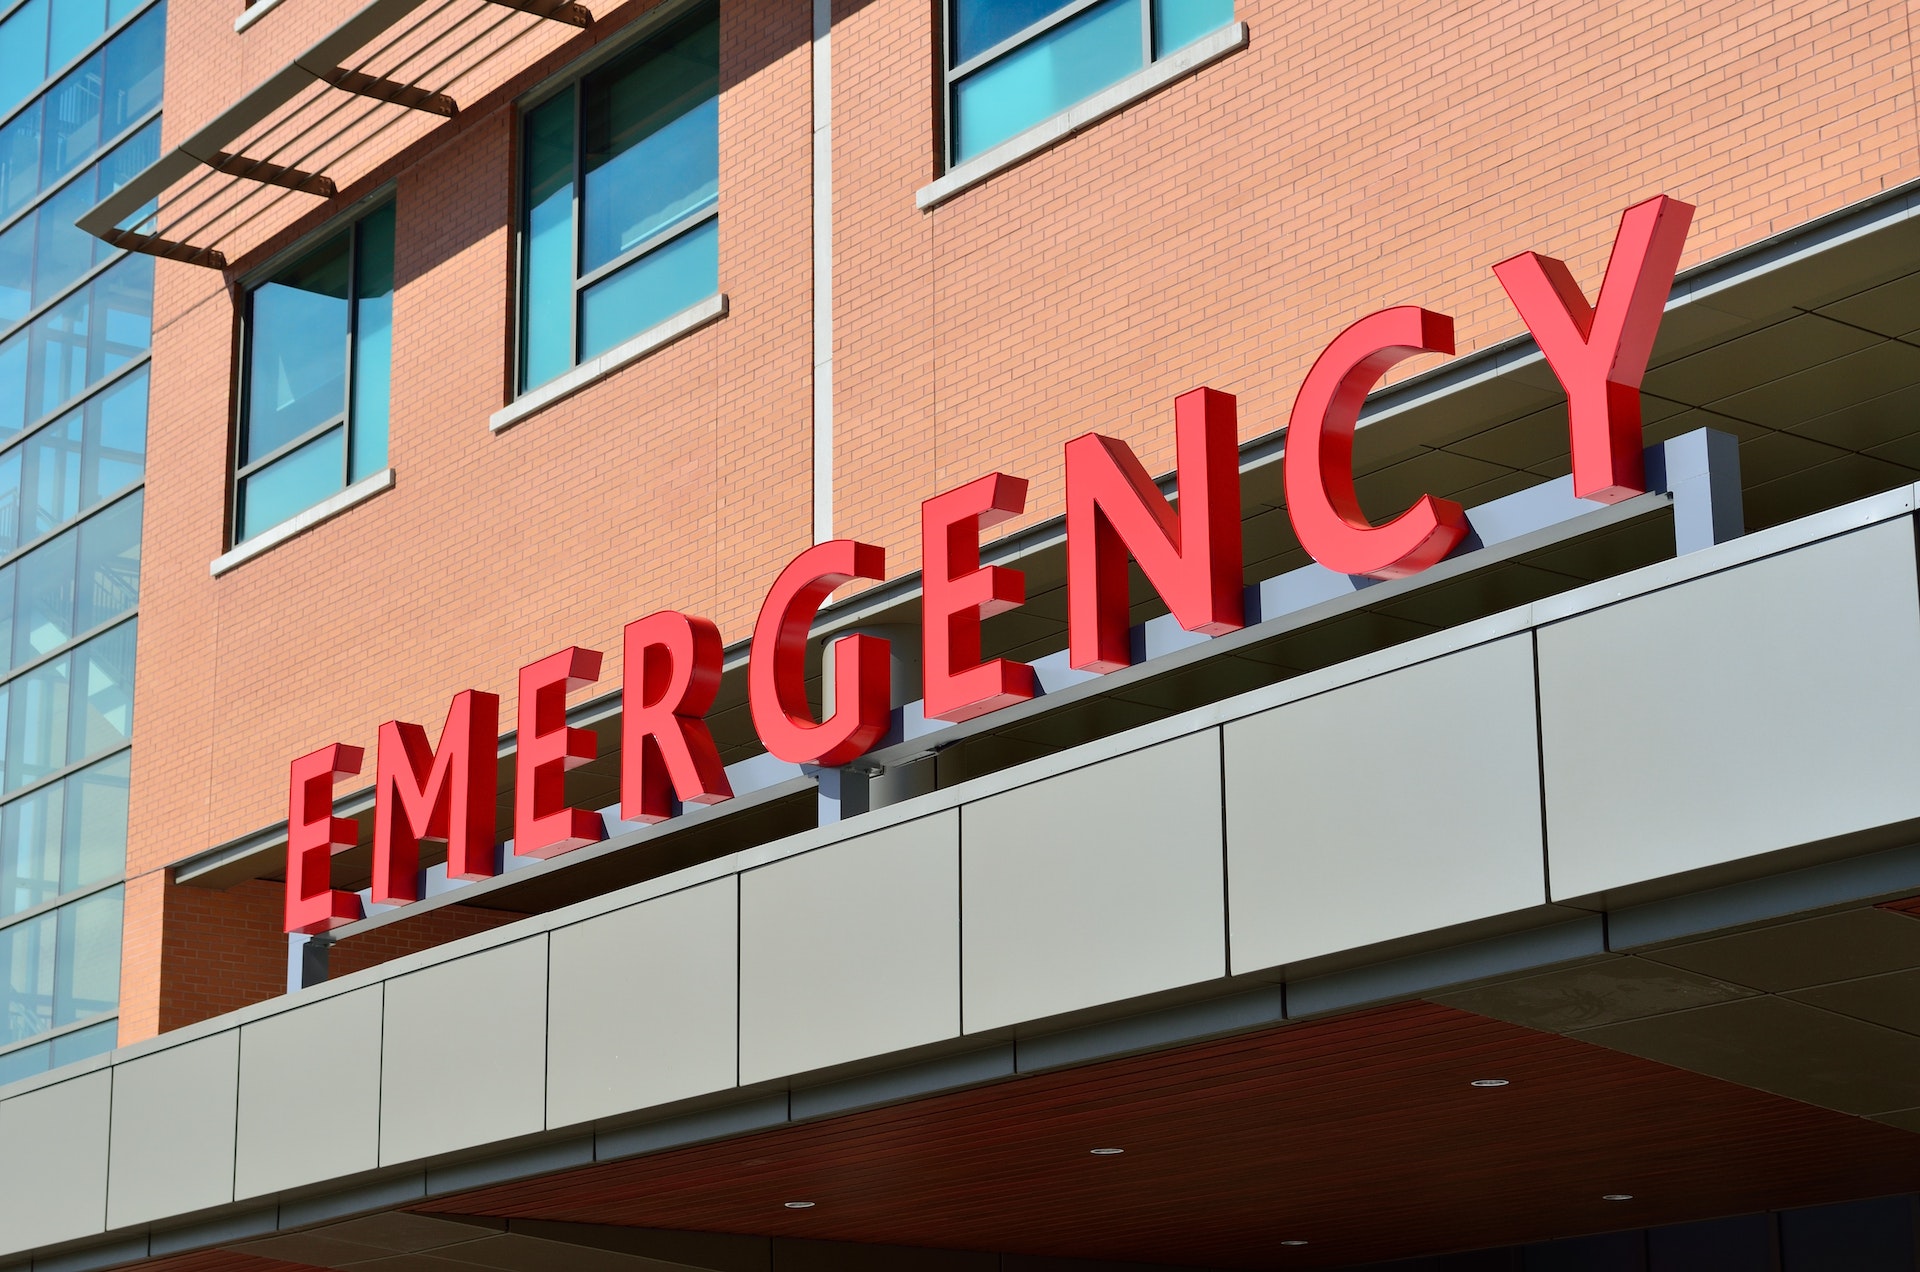 The emergency department of a hospital | Source: Pexels